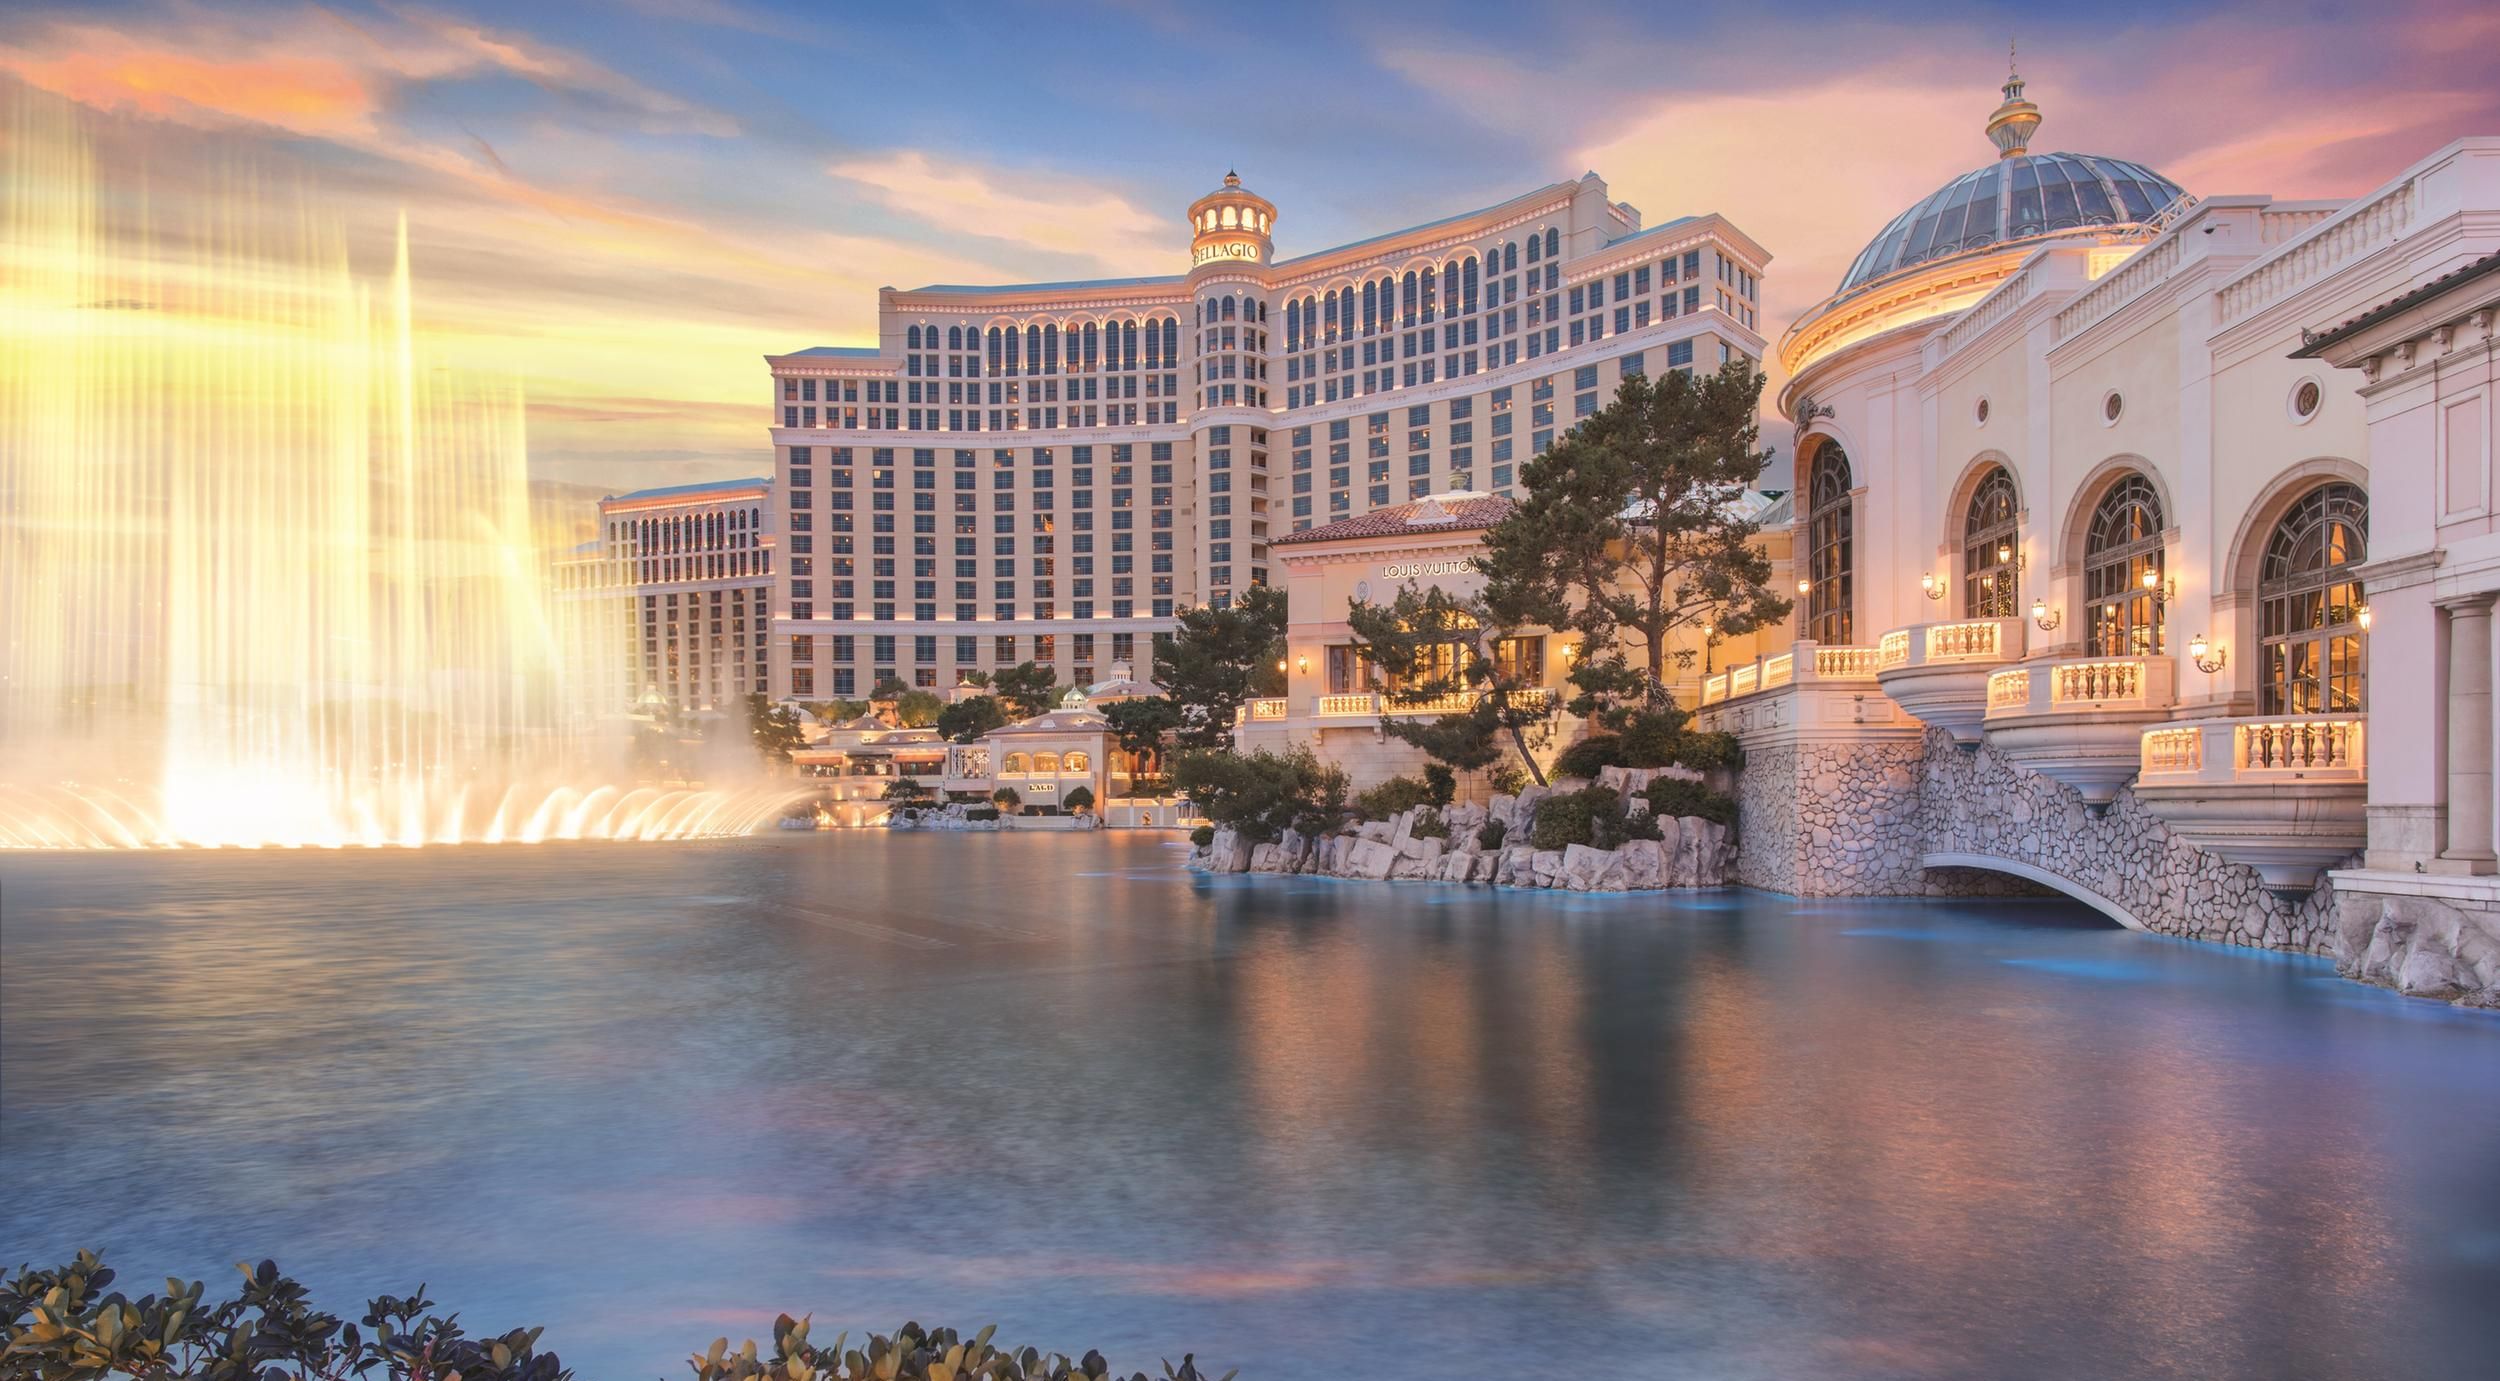 Bellagio Las Vegas on X: The final touches have been added